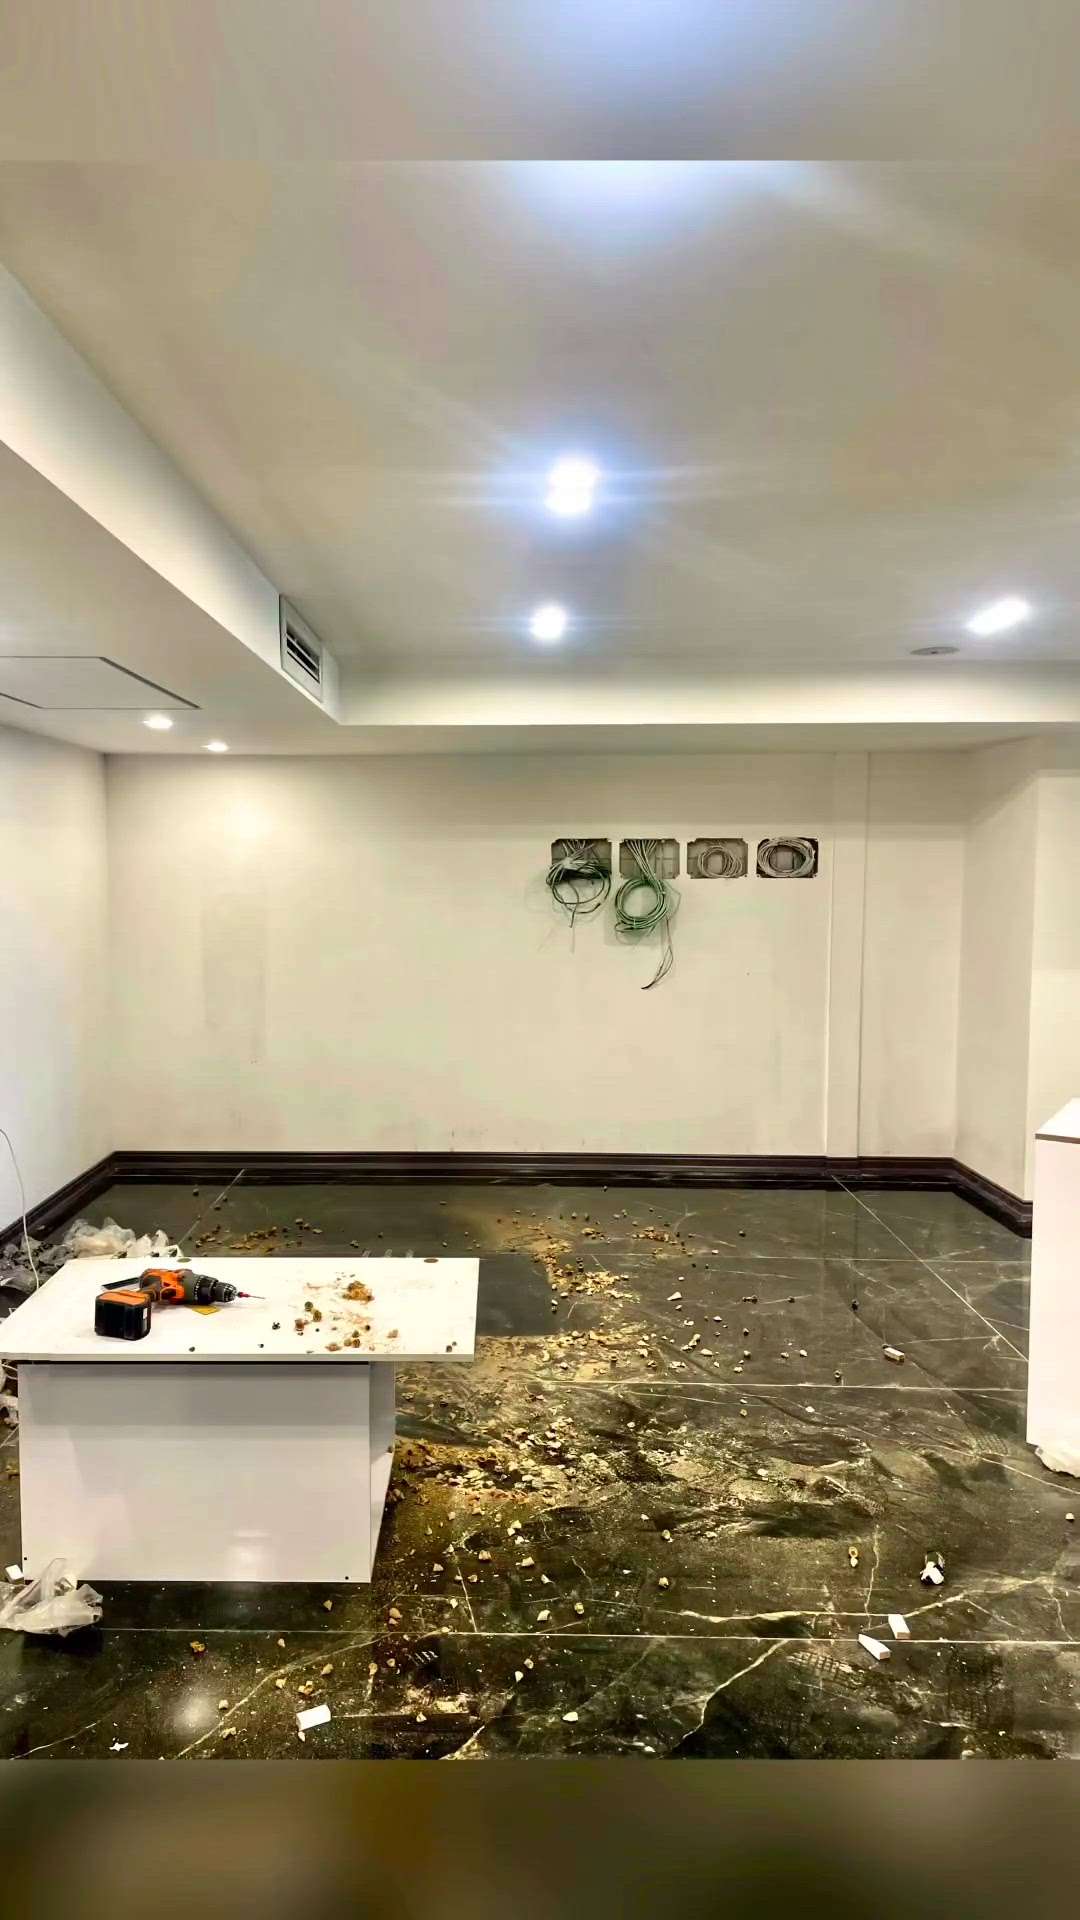 Looking for one-stop interior design solutions for your dream home or office? 😍
At Stunning decor, we don't just build homes but craft your desires into fresh designs to make you fall in love with your home! ✨
Get your dream home designed by us 💫furniture
📩 Comment or DM ' smart ' to order
📞Contact -
💻 https://stunningdecor..com
Follow 👉@stunningdecor
Follow👉 @stunningdecor
Follow👉 @stunninhdecor
➖➖➖➖➖➖➖➖
#interiordesign #designinterior #interiordesigner #designdeinteriores #interiordesignideas #interiordesigners #designerdeinteriores #interiordesigns #interiordesigninspiration
.